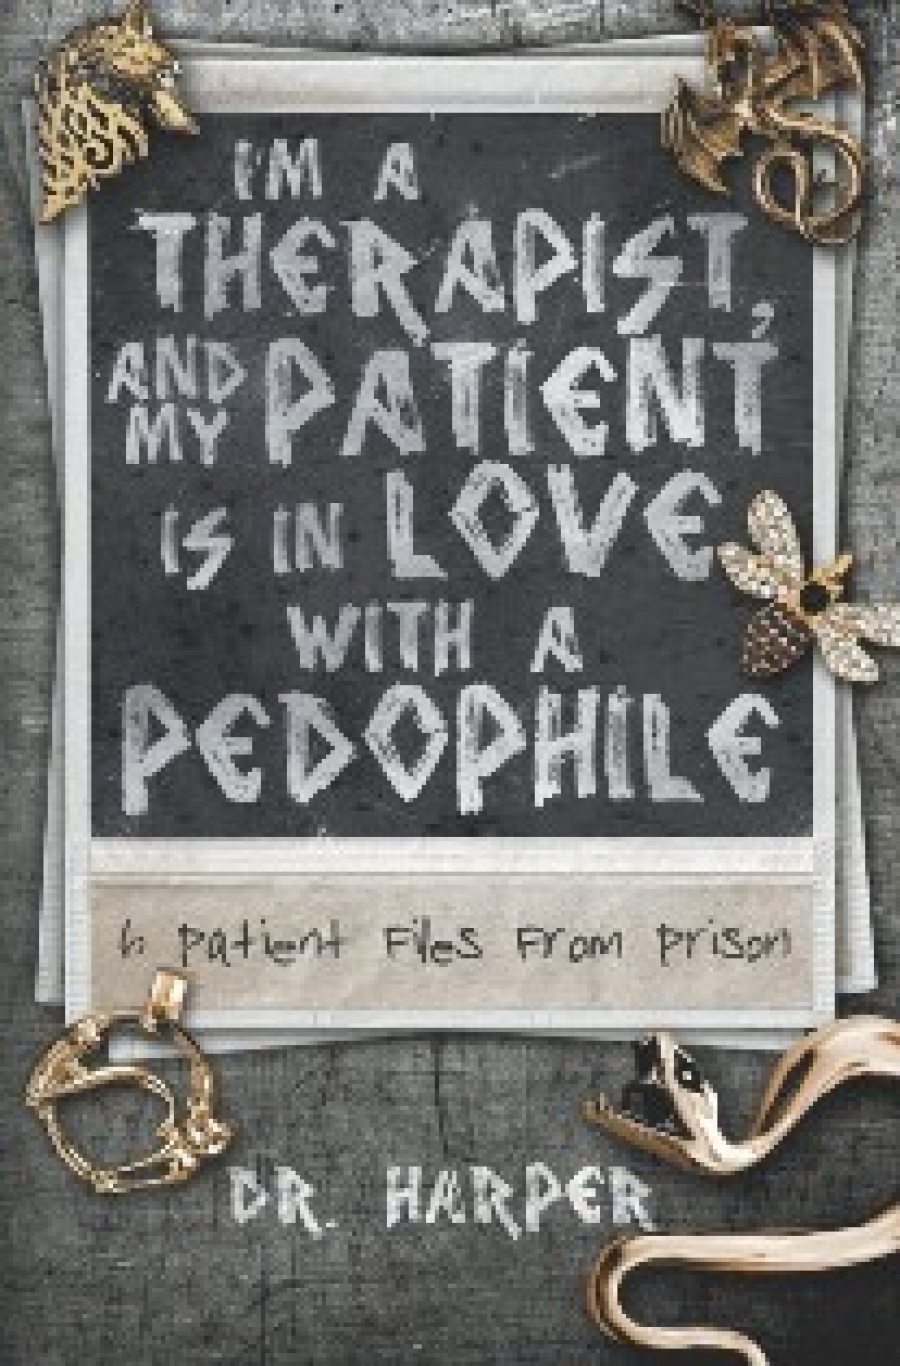 Harper I'm a Therapist, and My Patient is In Love with a Pedophile: 6 Patient Files From Prison 